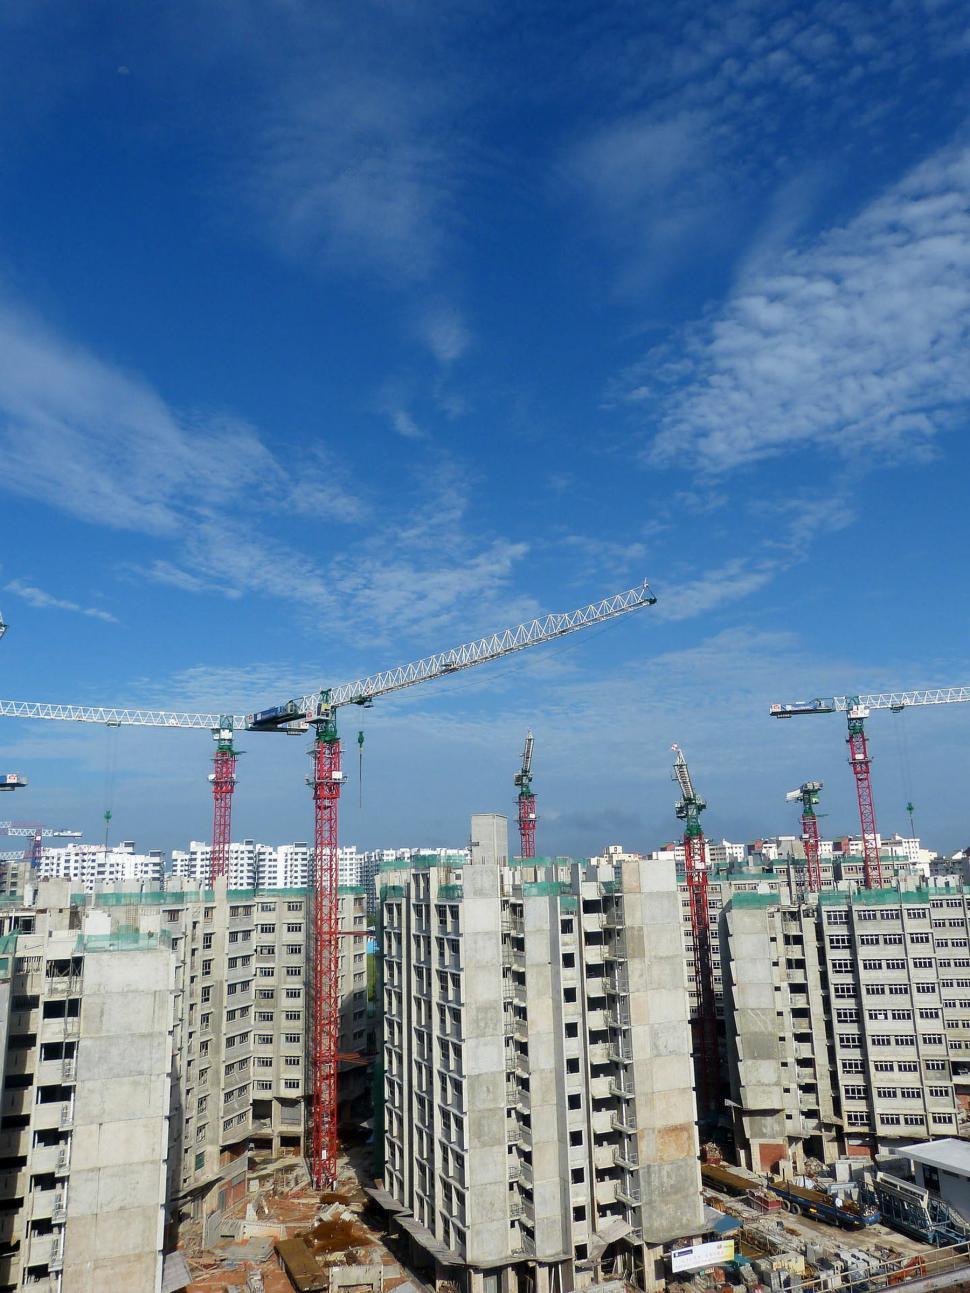 Free Image of Group of Buildings Under Construction Under a Blue Sky 